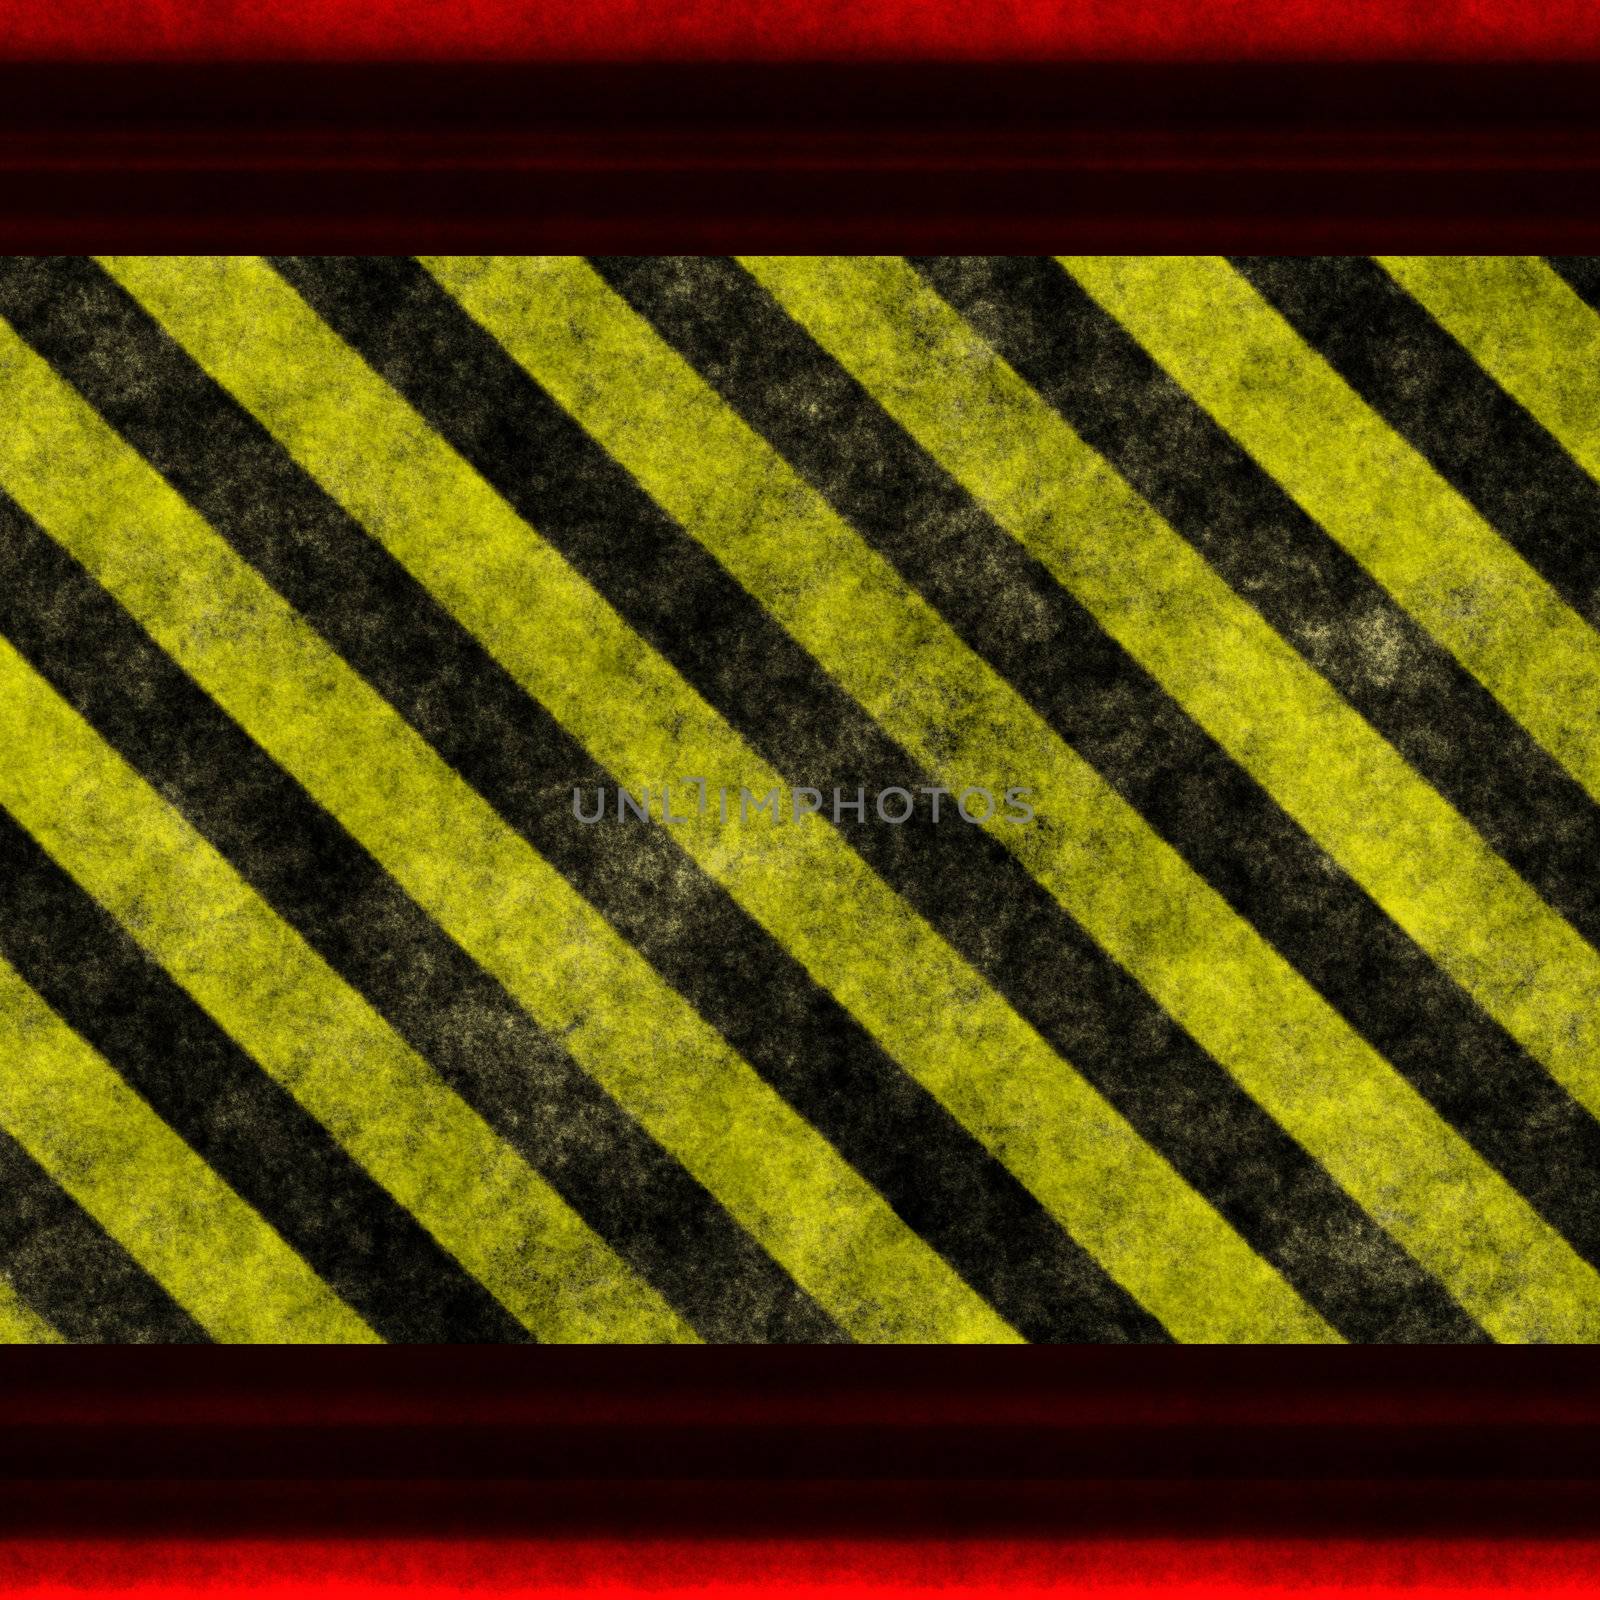 Black and yellow warning / hazard background with red frame